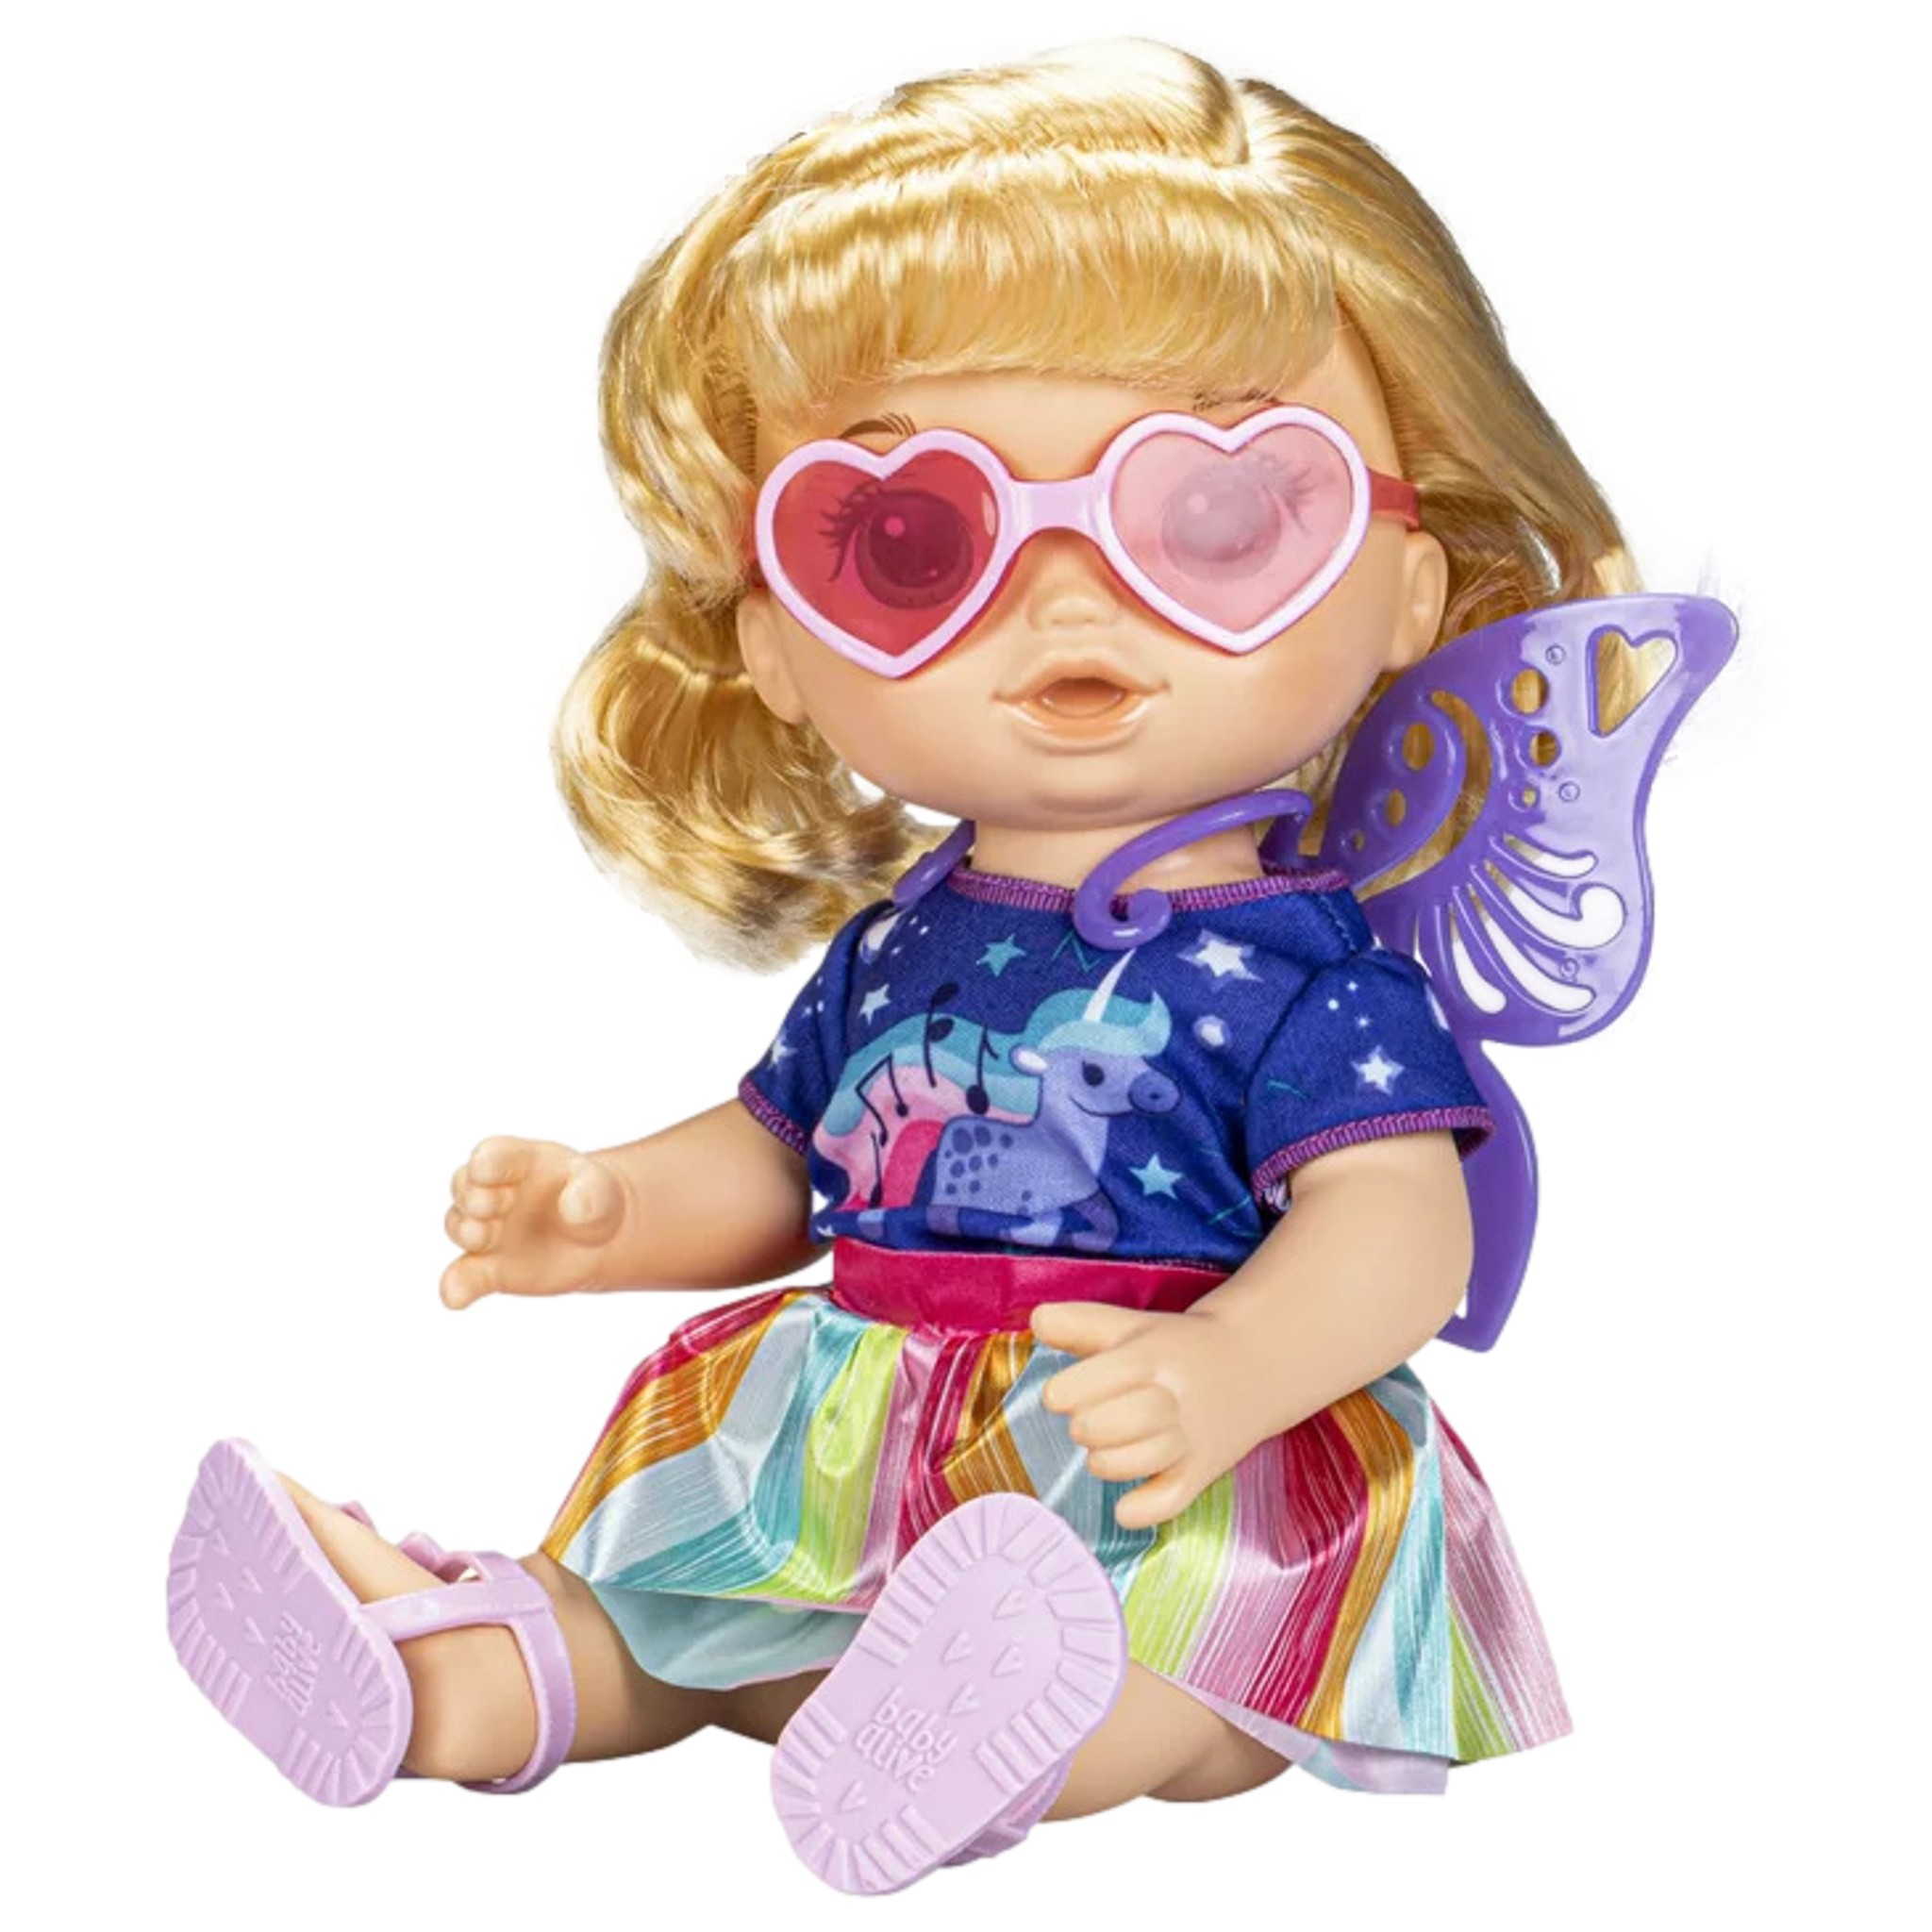 Baby Alive Magical Styles Baby Doll, Blonde Hair, 9 Dress-Up Accessories